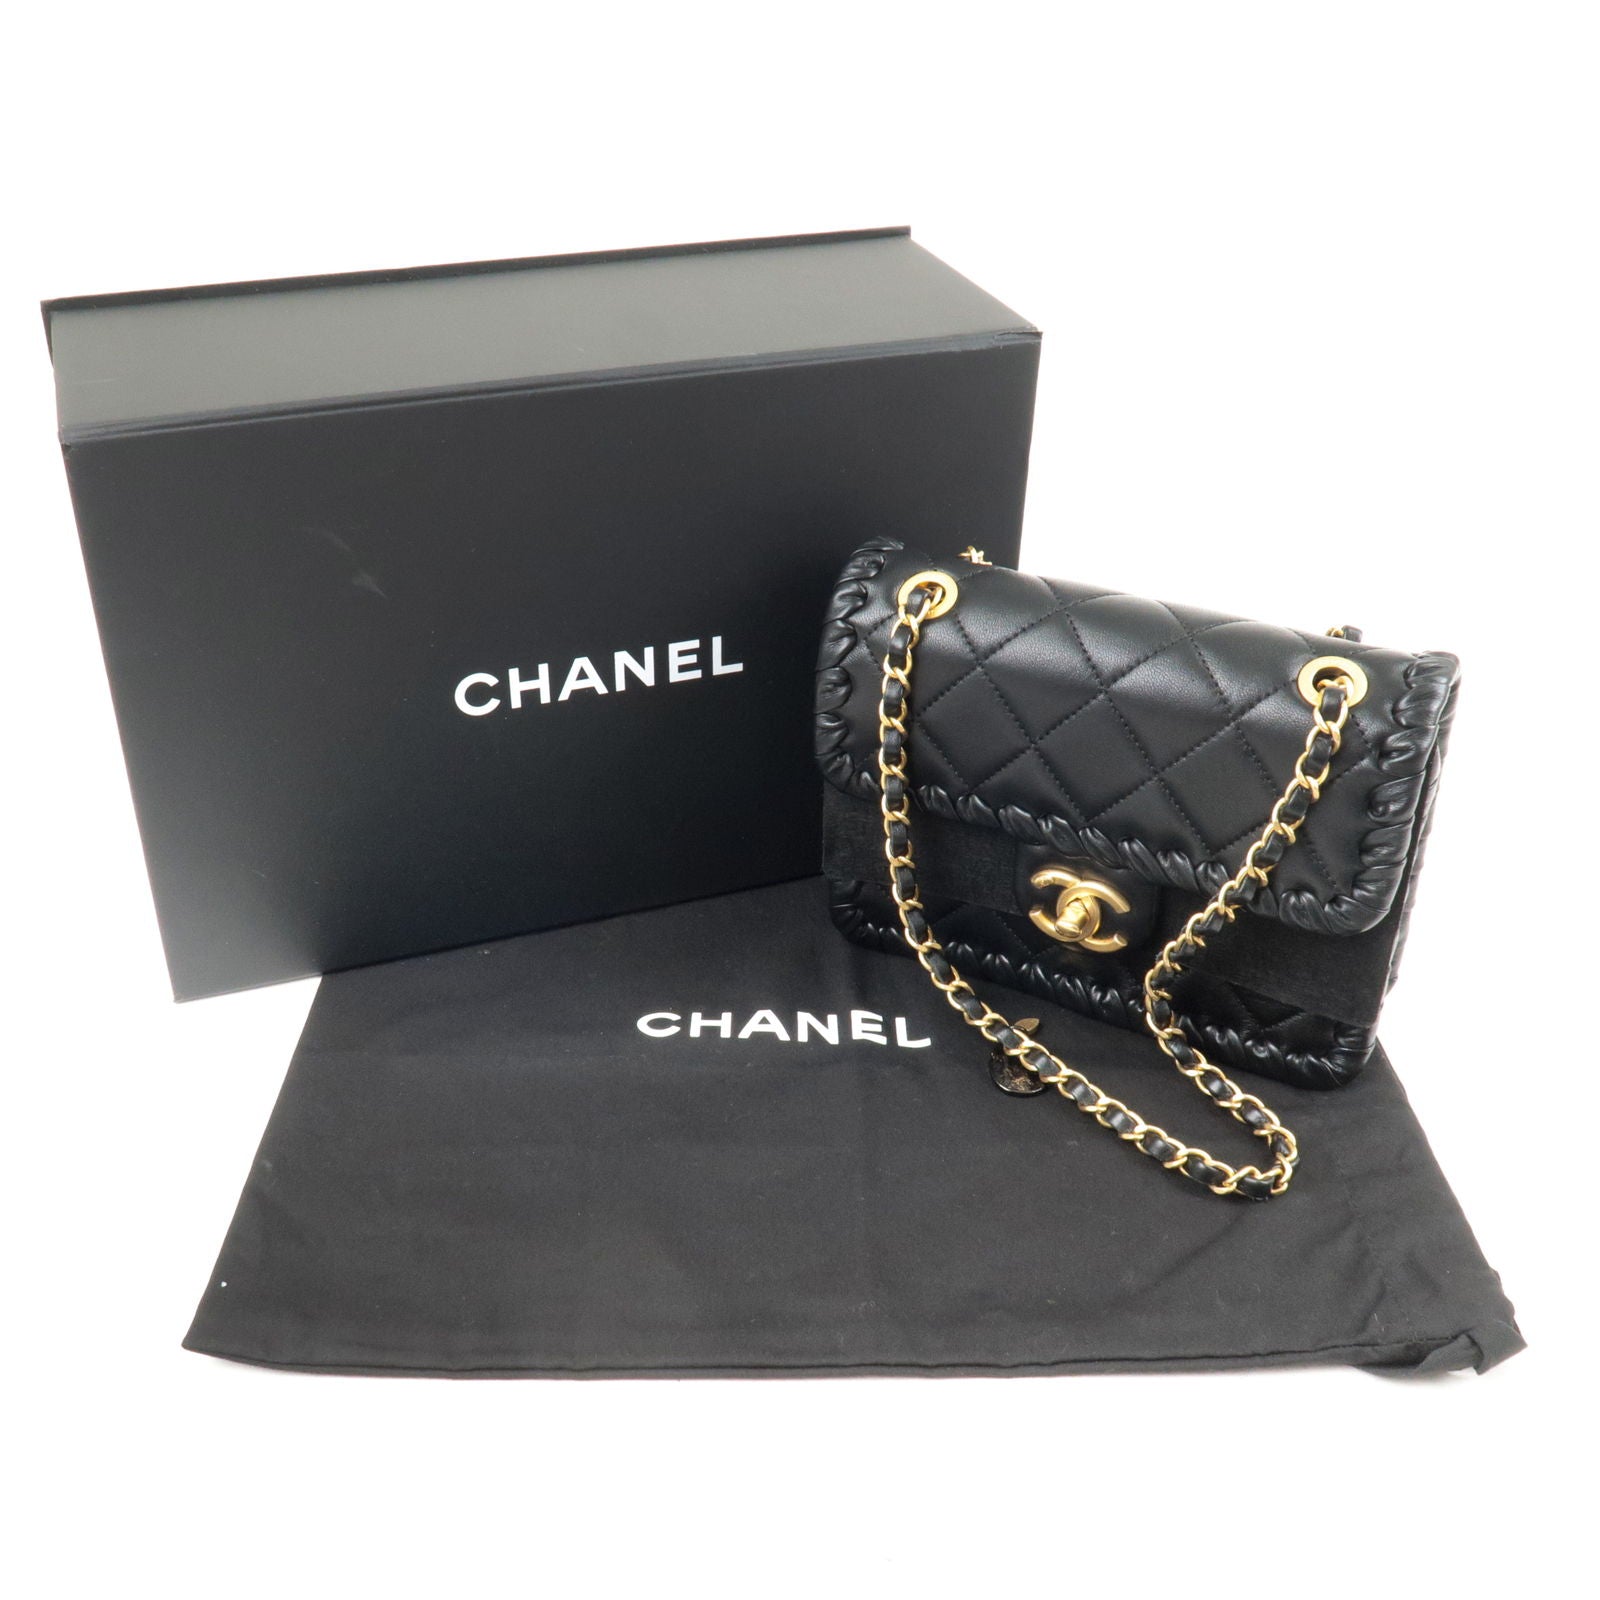 Chain - CHANEL - Bag - ep_vintage luxury Store - Chanel autres